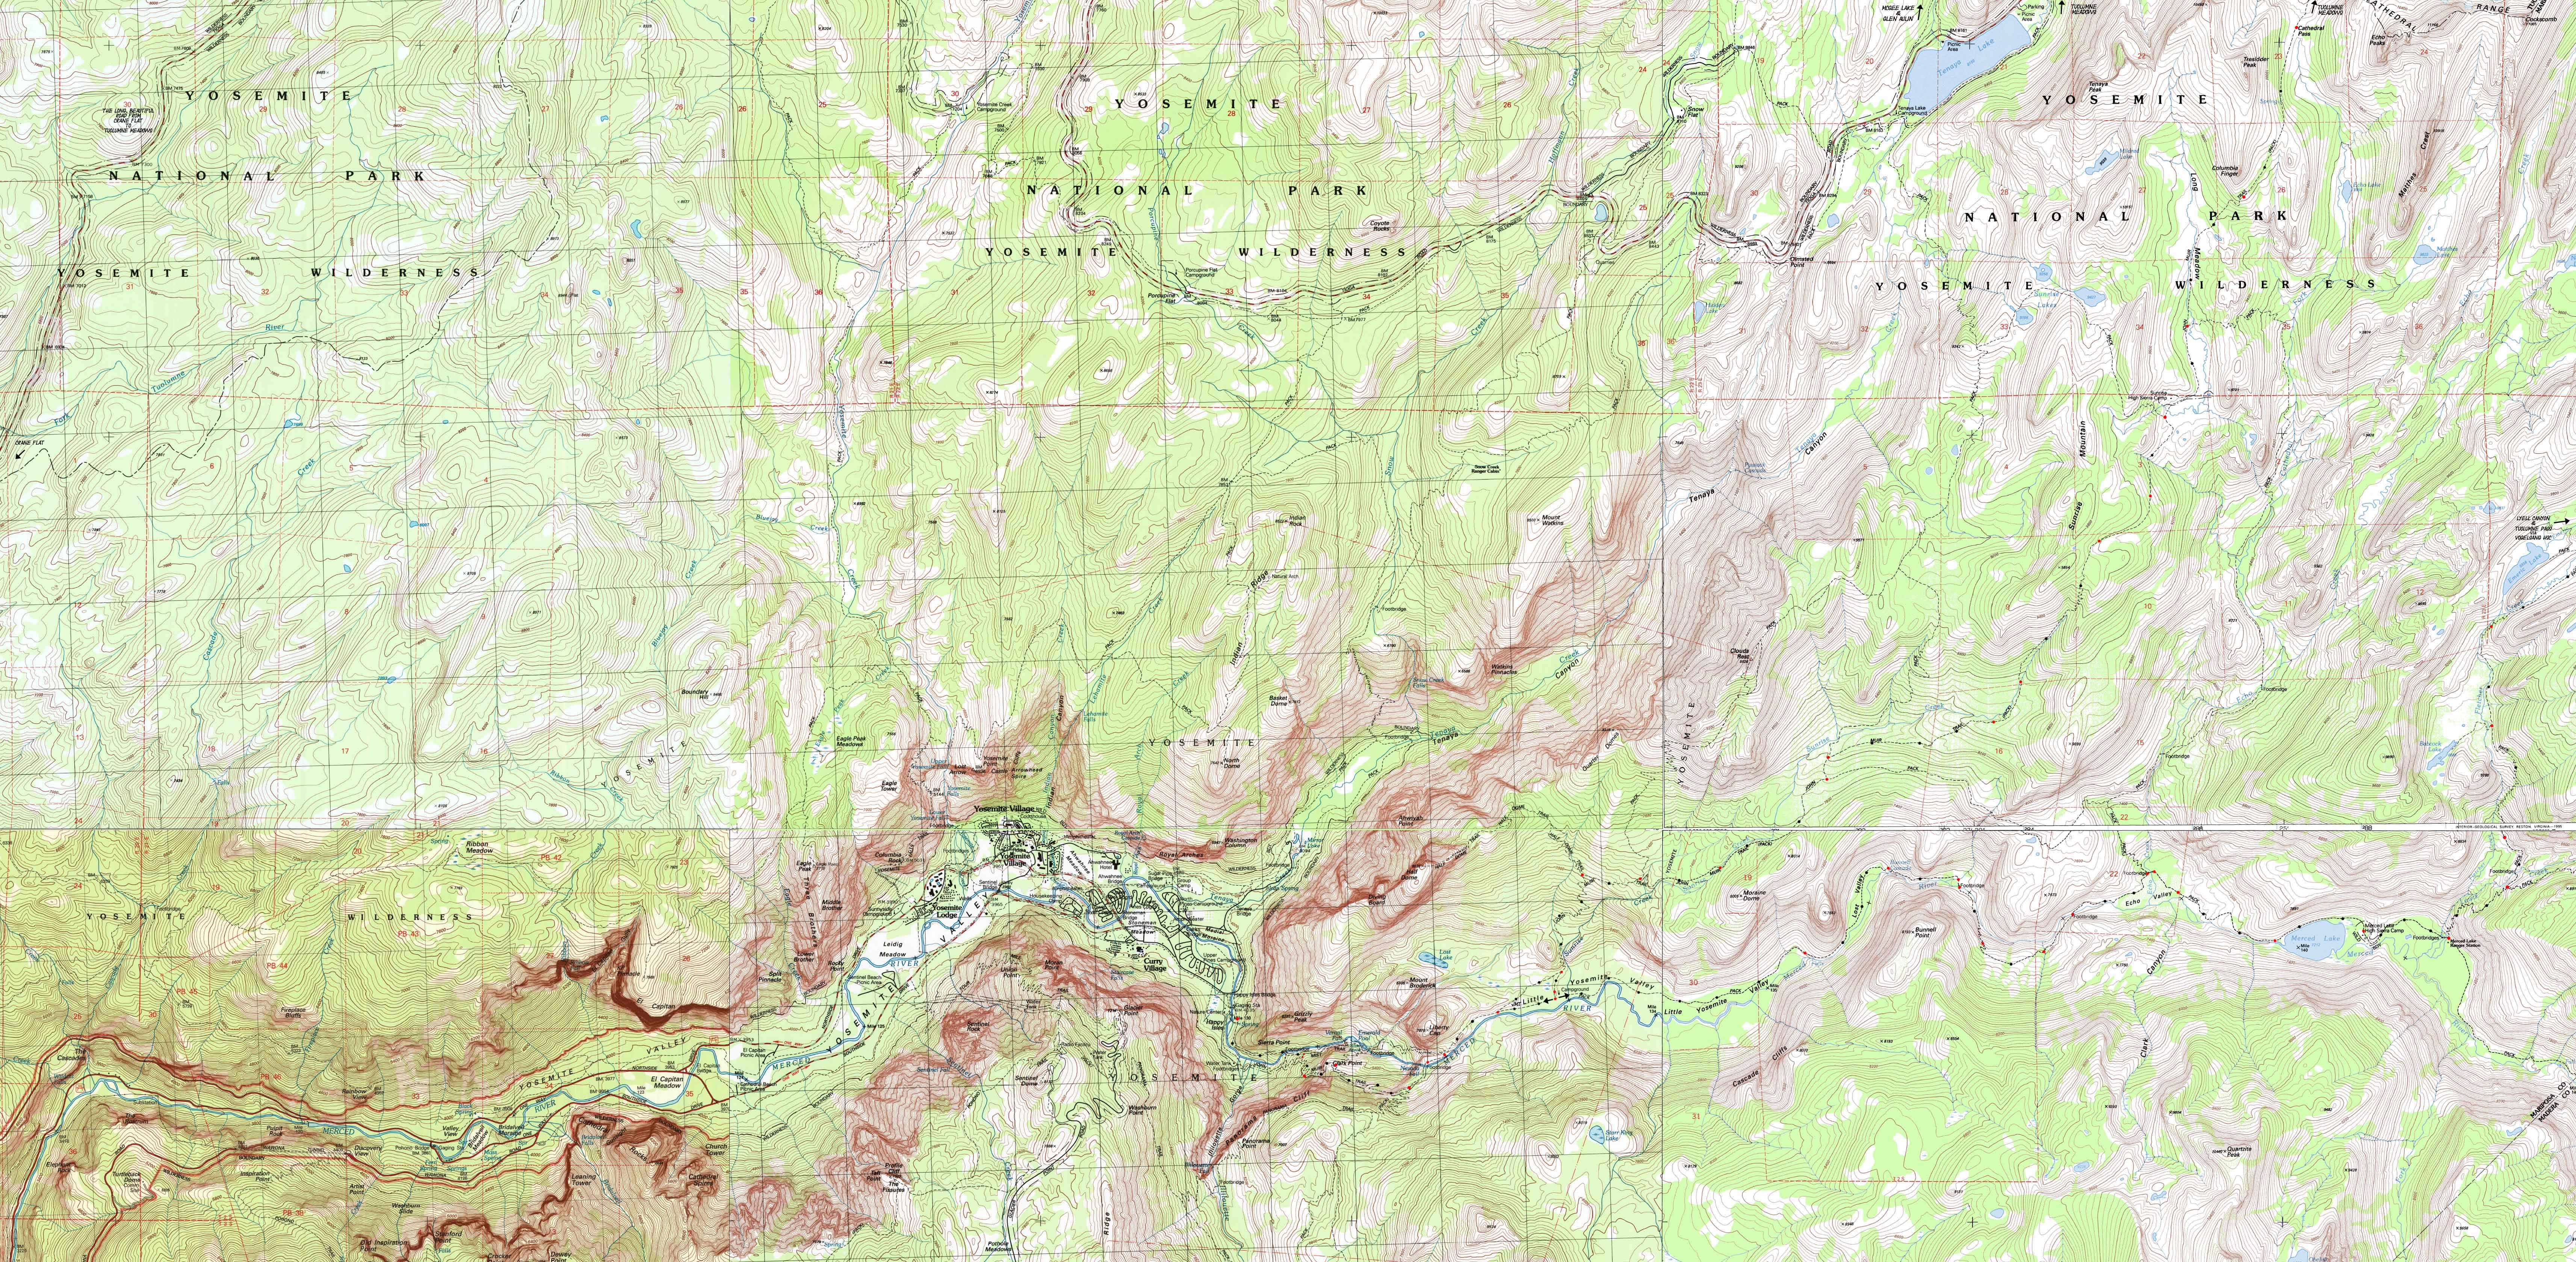 Backpacking map of Yosemite Valley for hikers on the John MuirTrail.